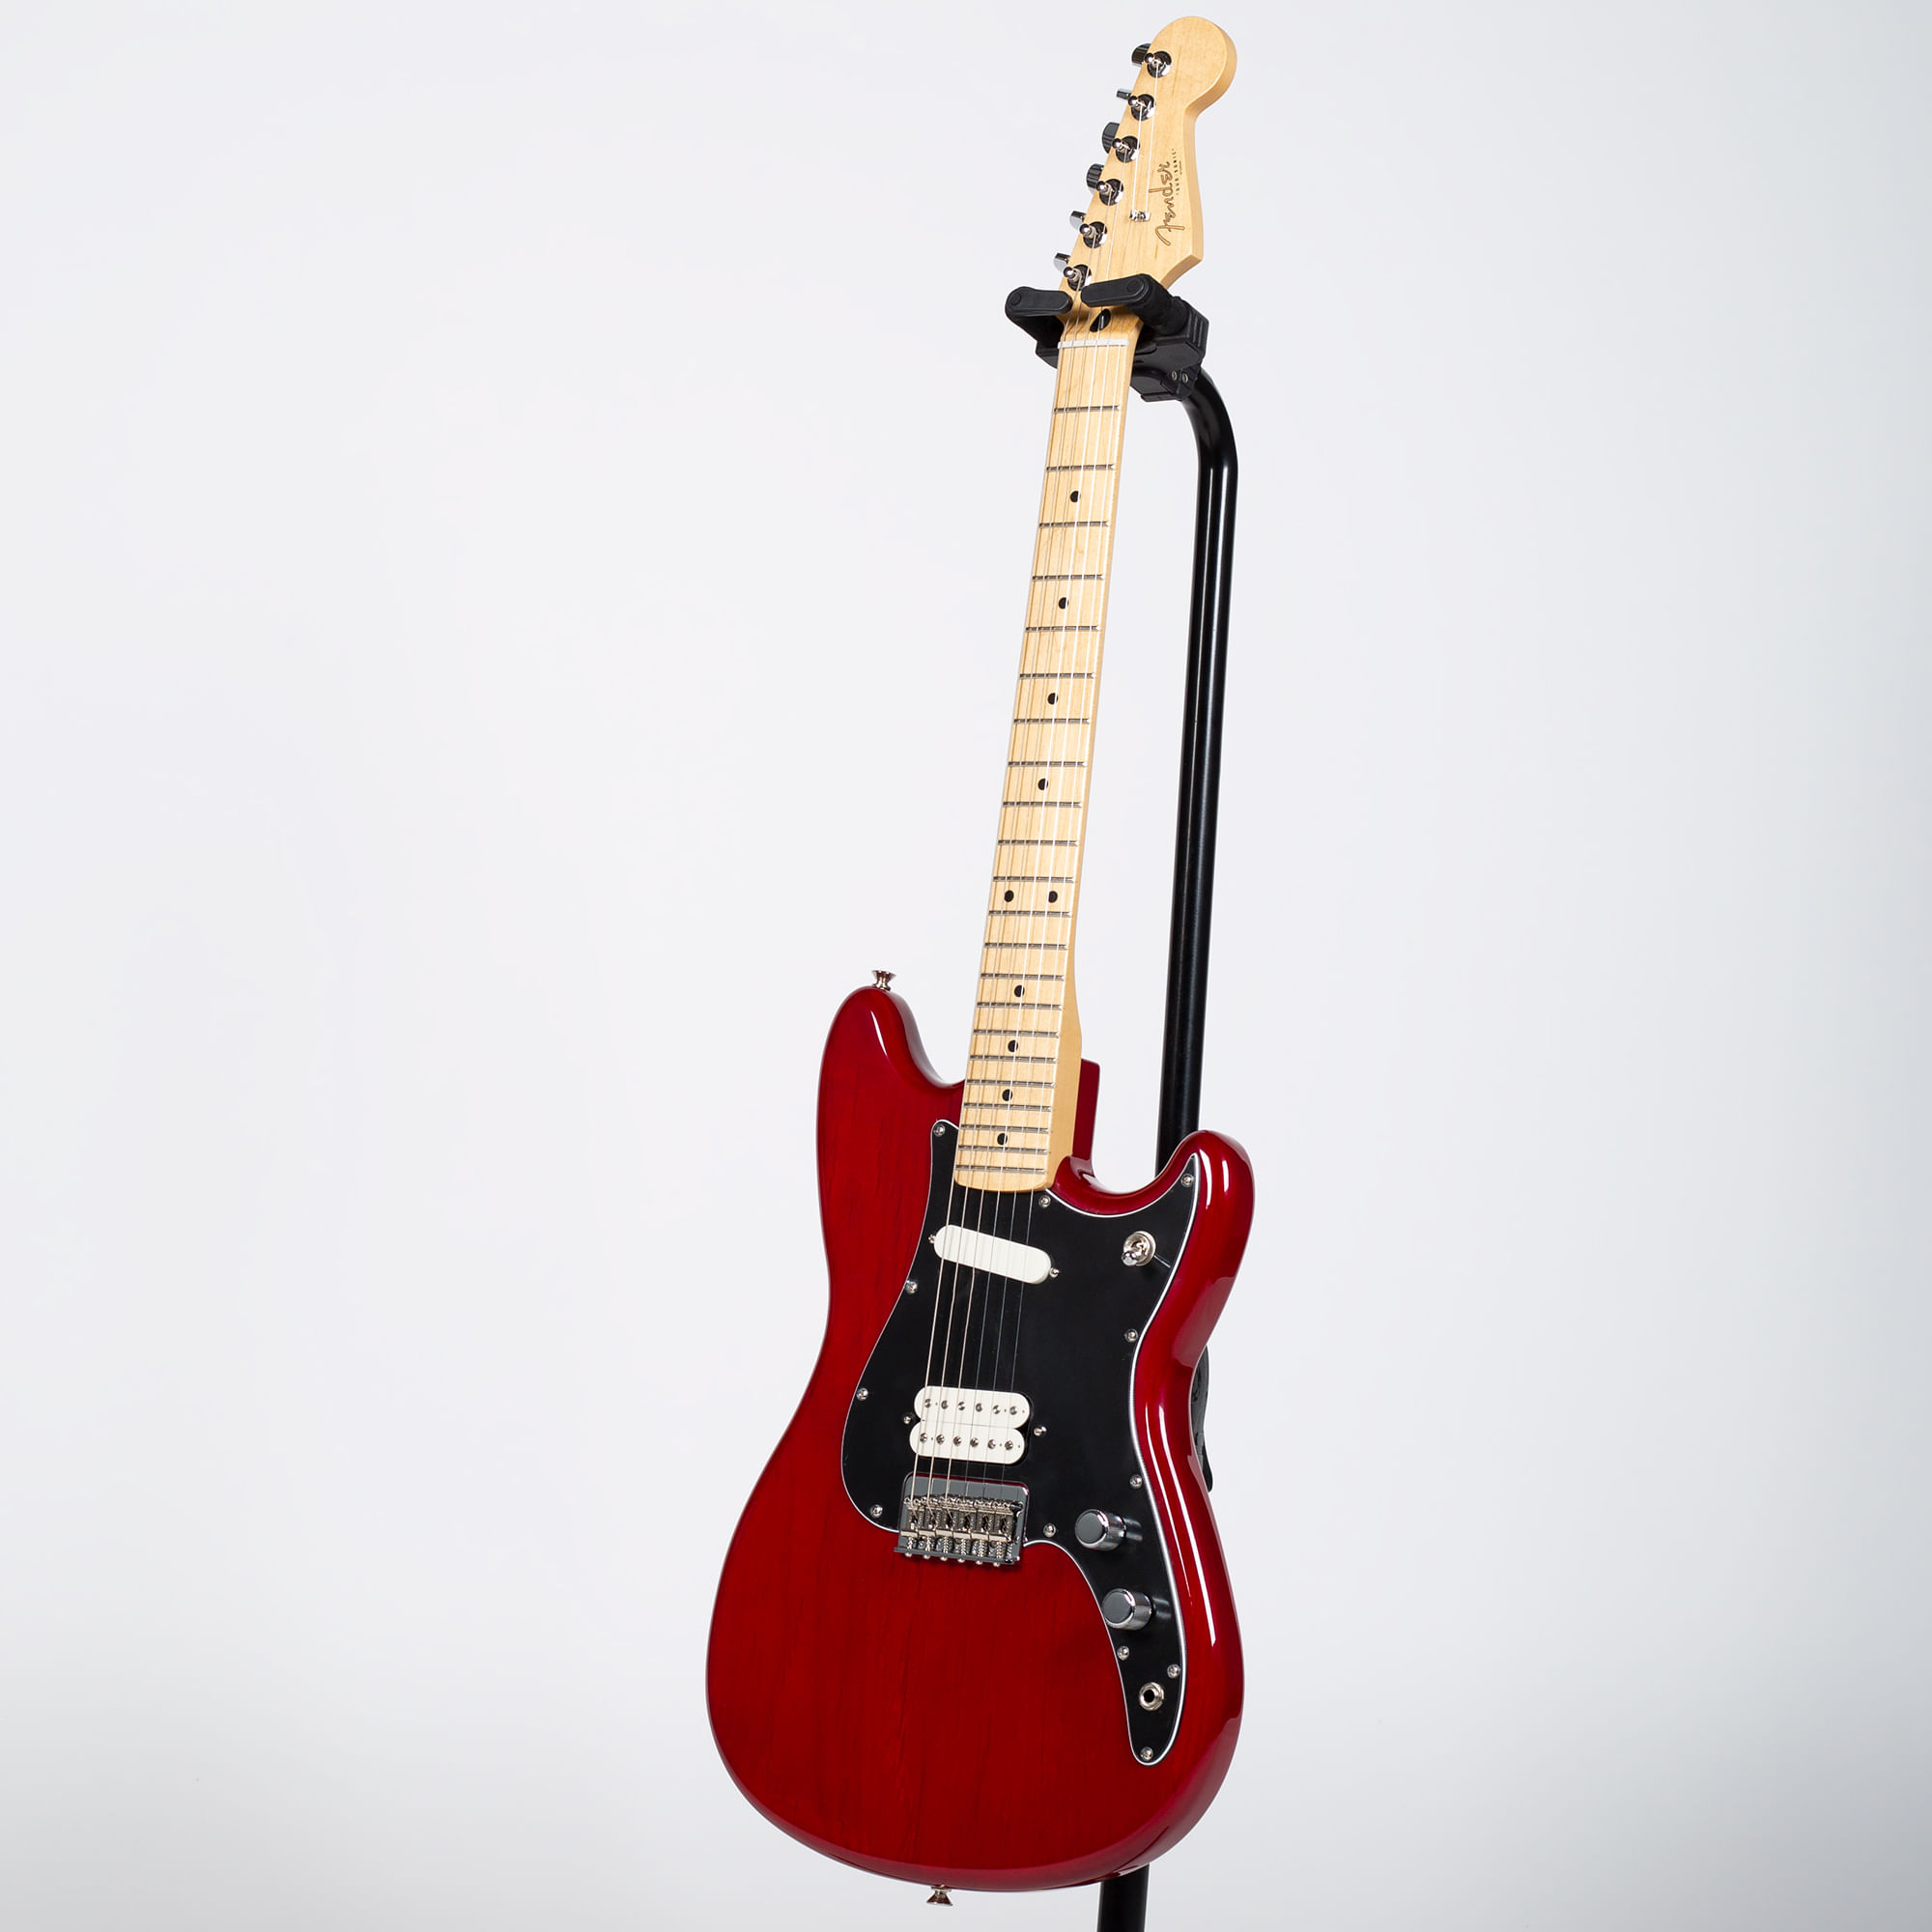 Fender Player Duo-Sonic HS Electric Guitar - Crimson Red